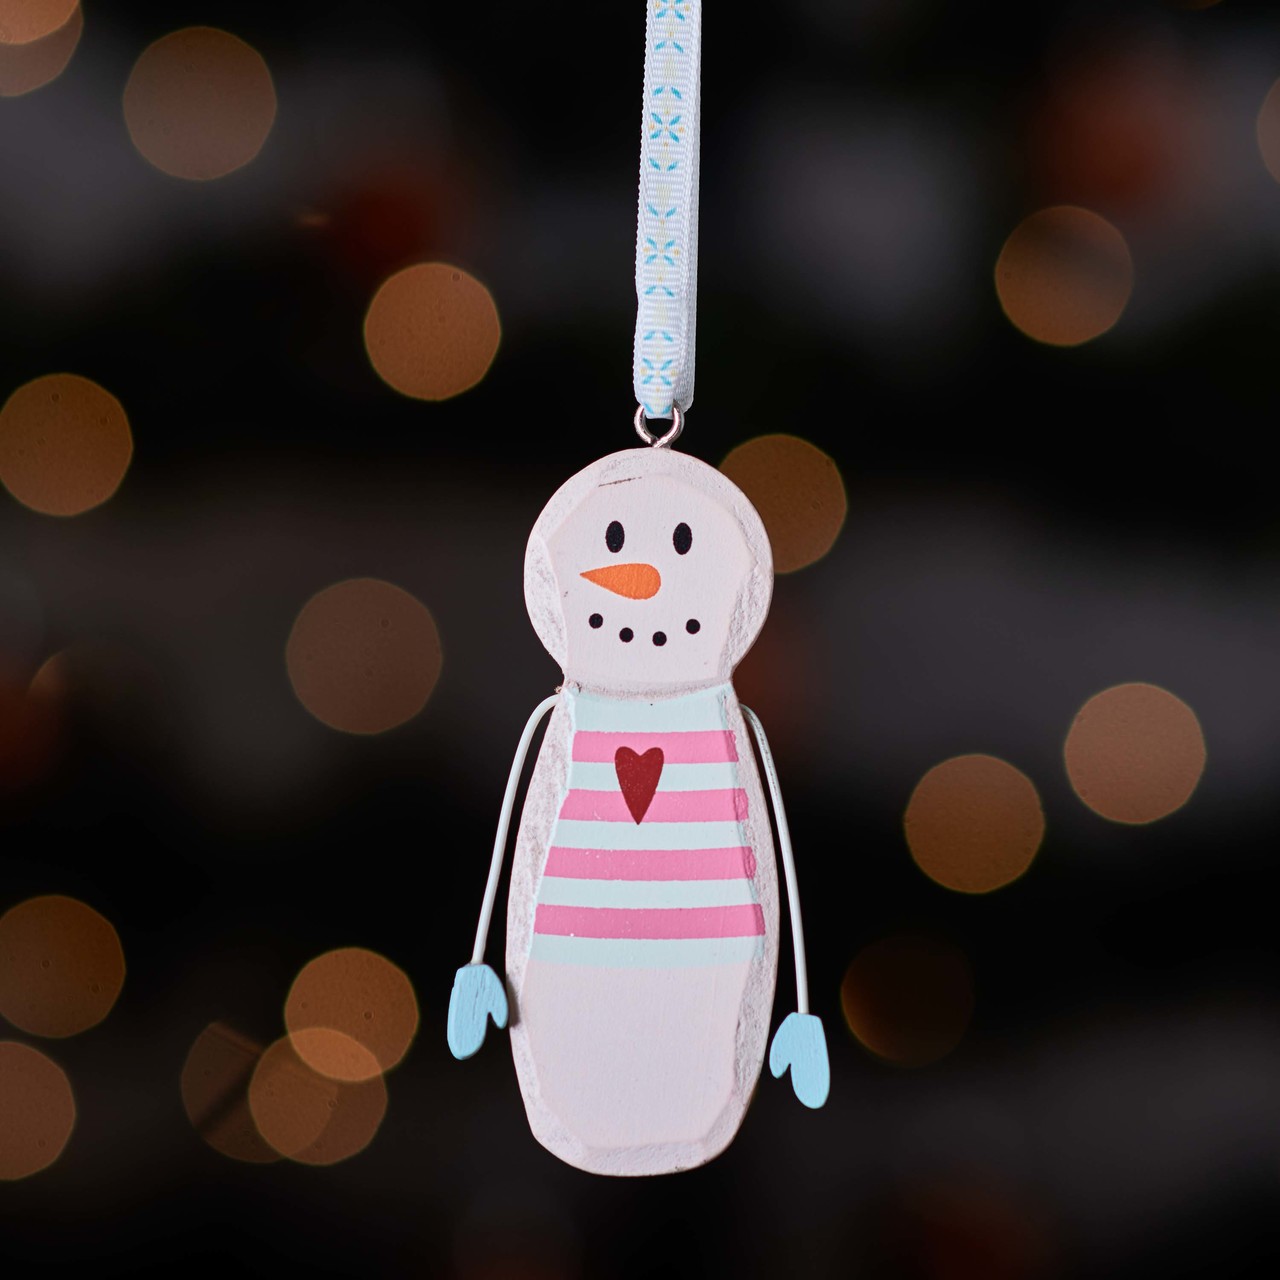 Hanging Snowman with heart